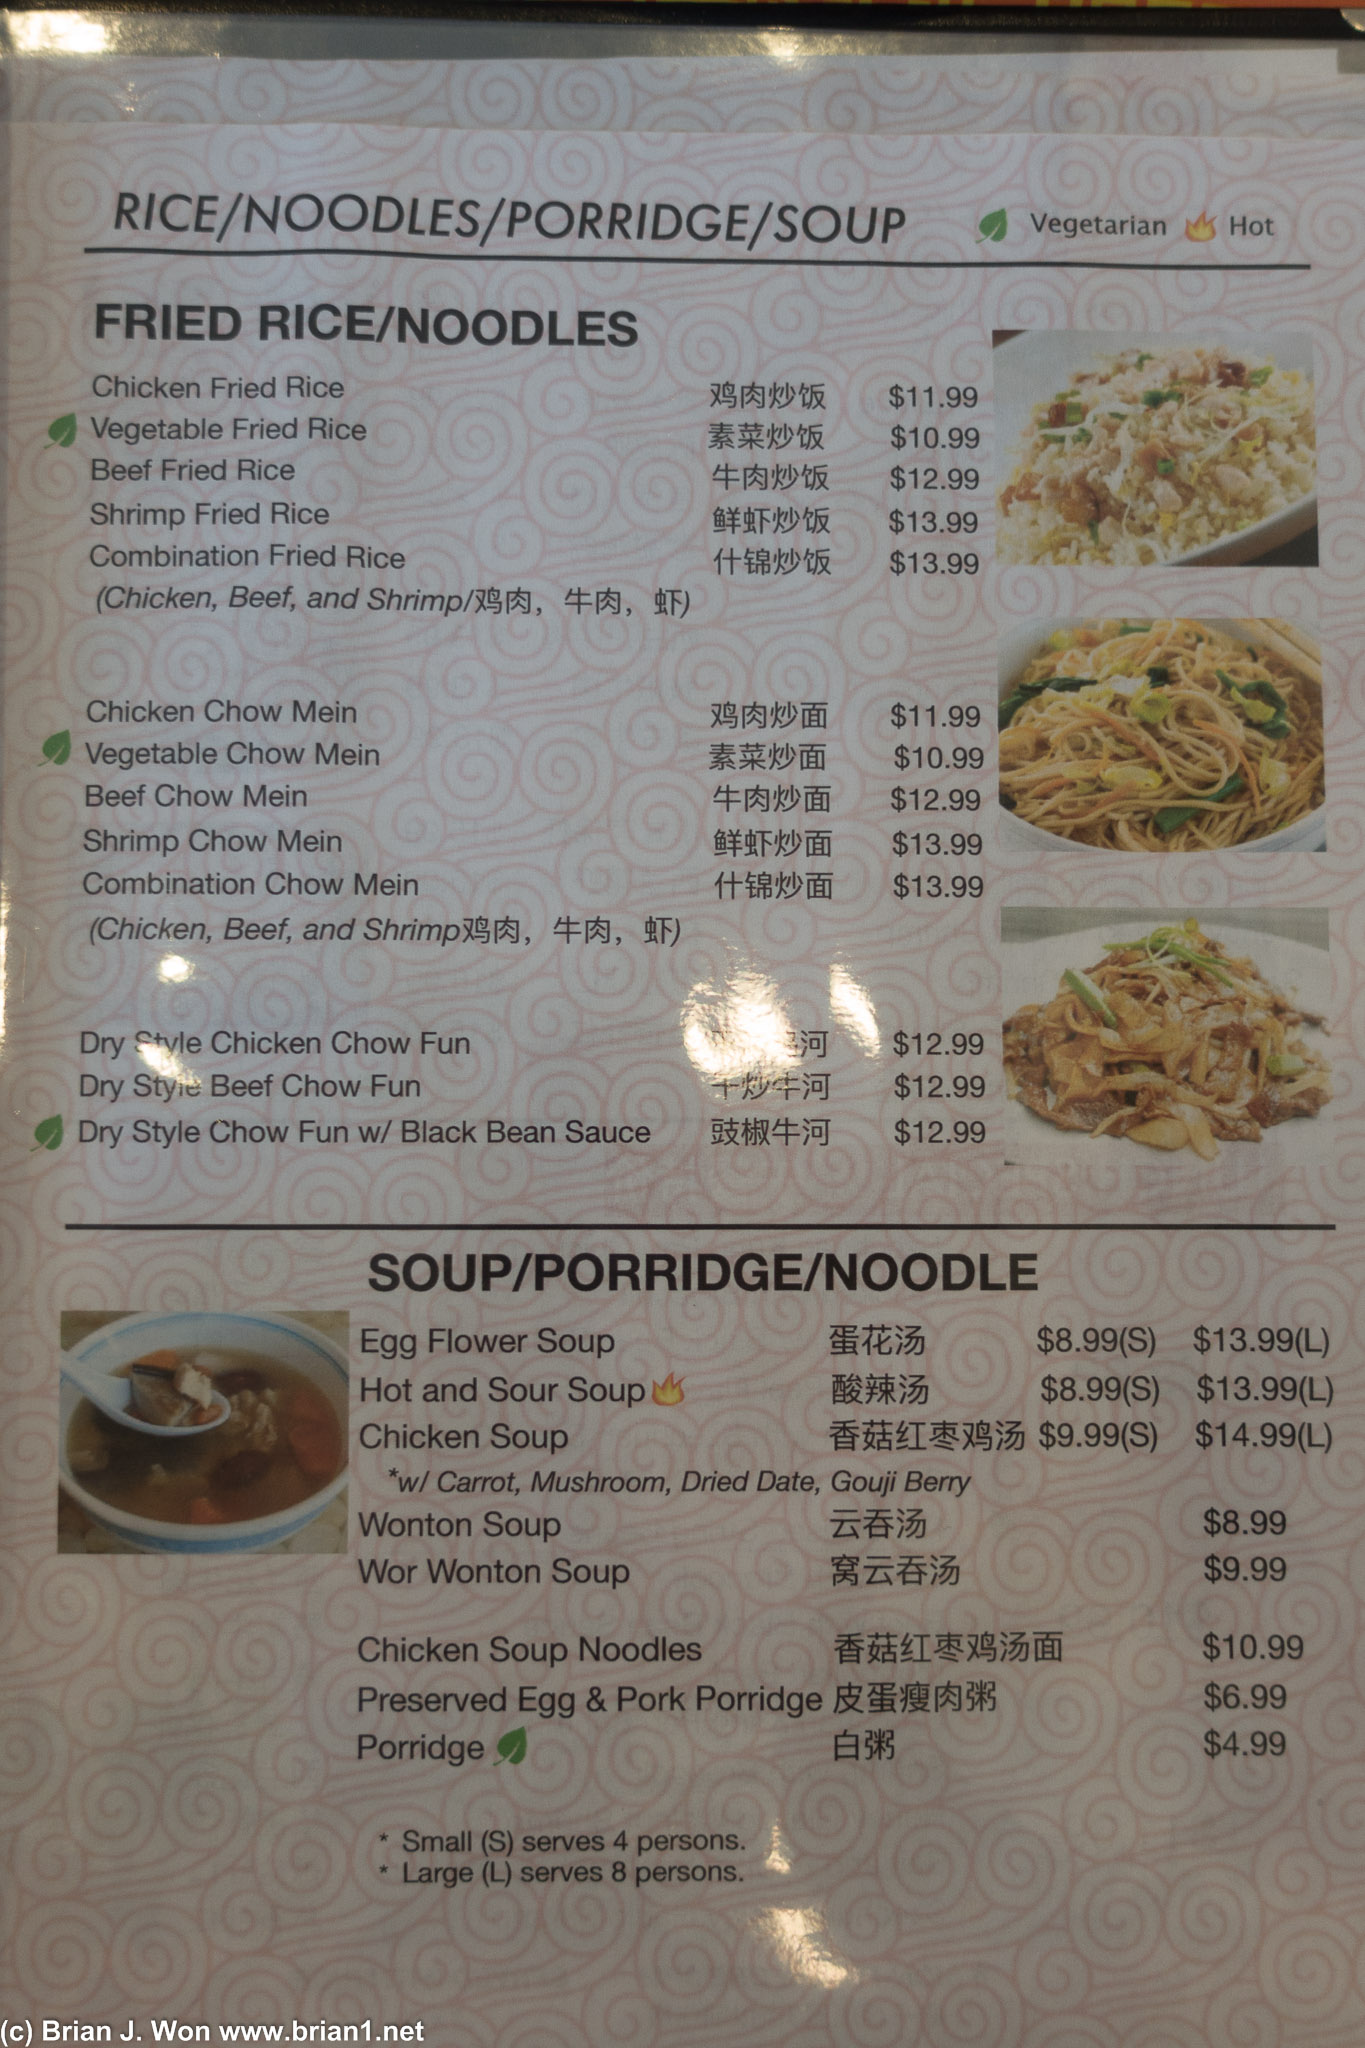 Almost makes the chow mein prices seem reasonable.